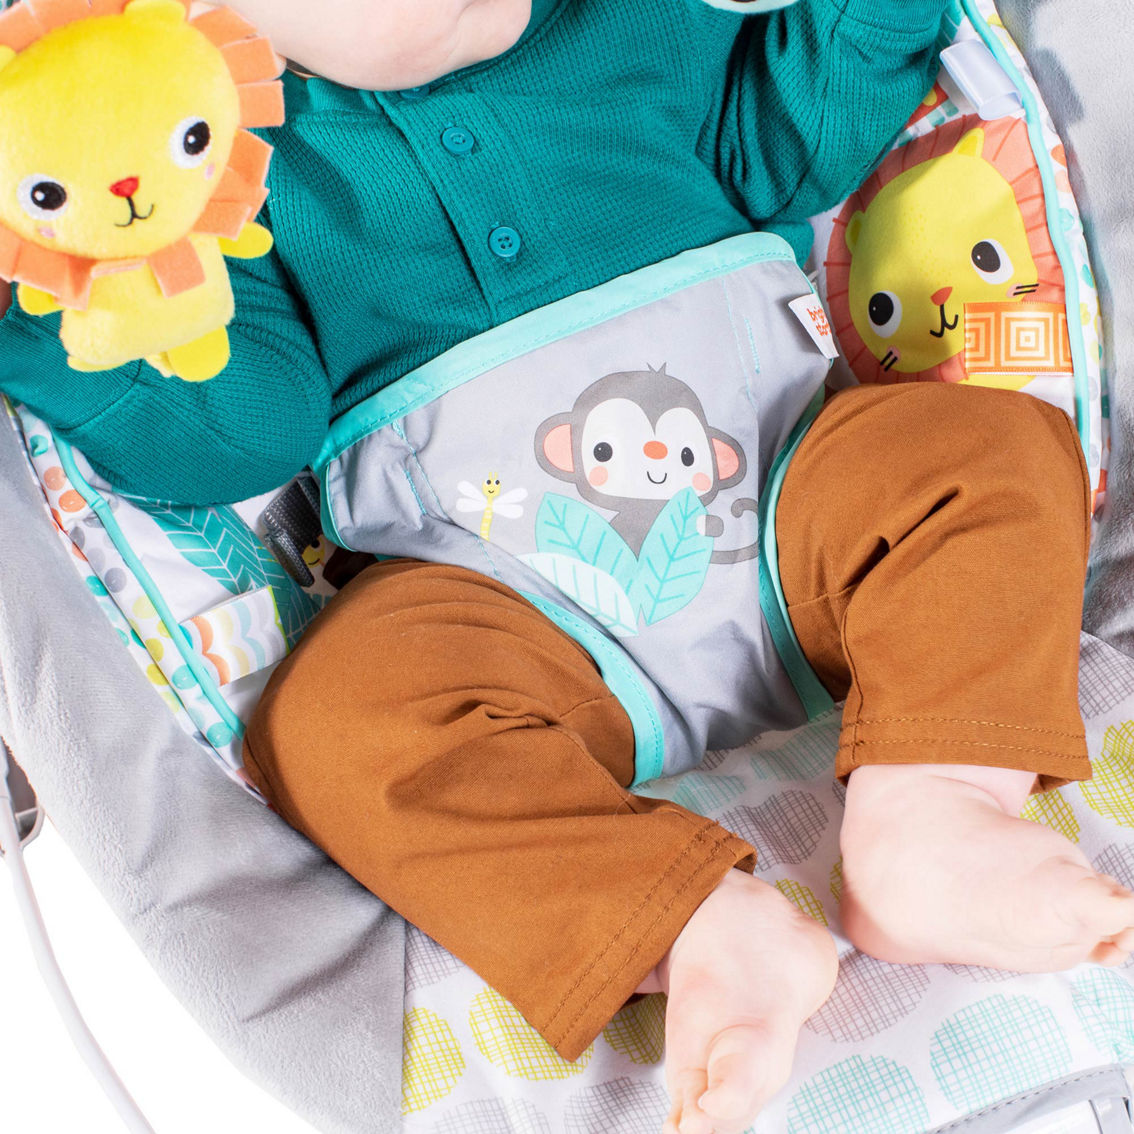 Bright Starts Whimsical Wild Bouncer - Image 9 of 10